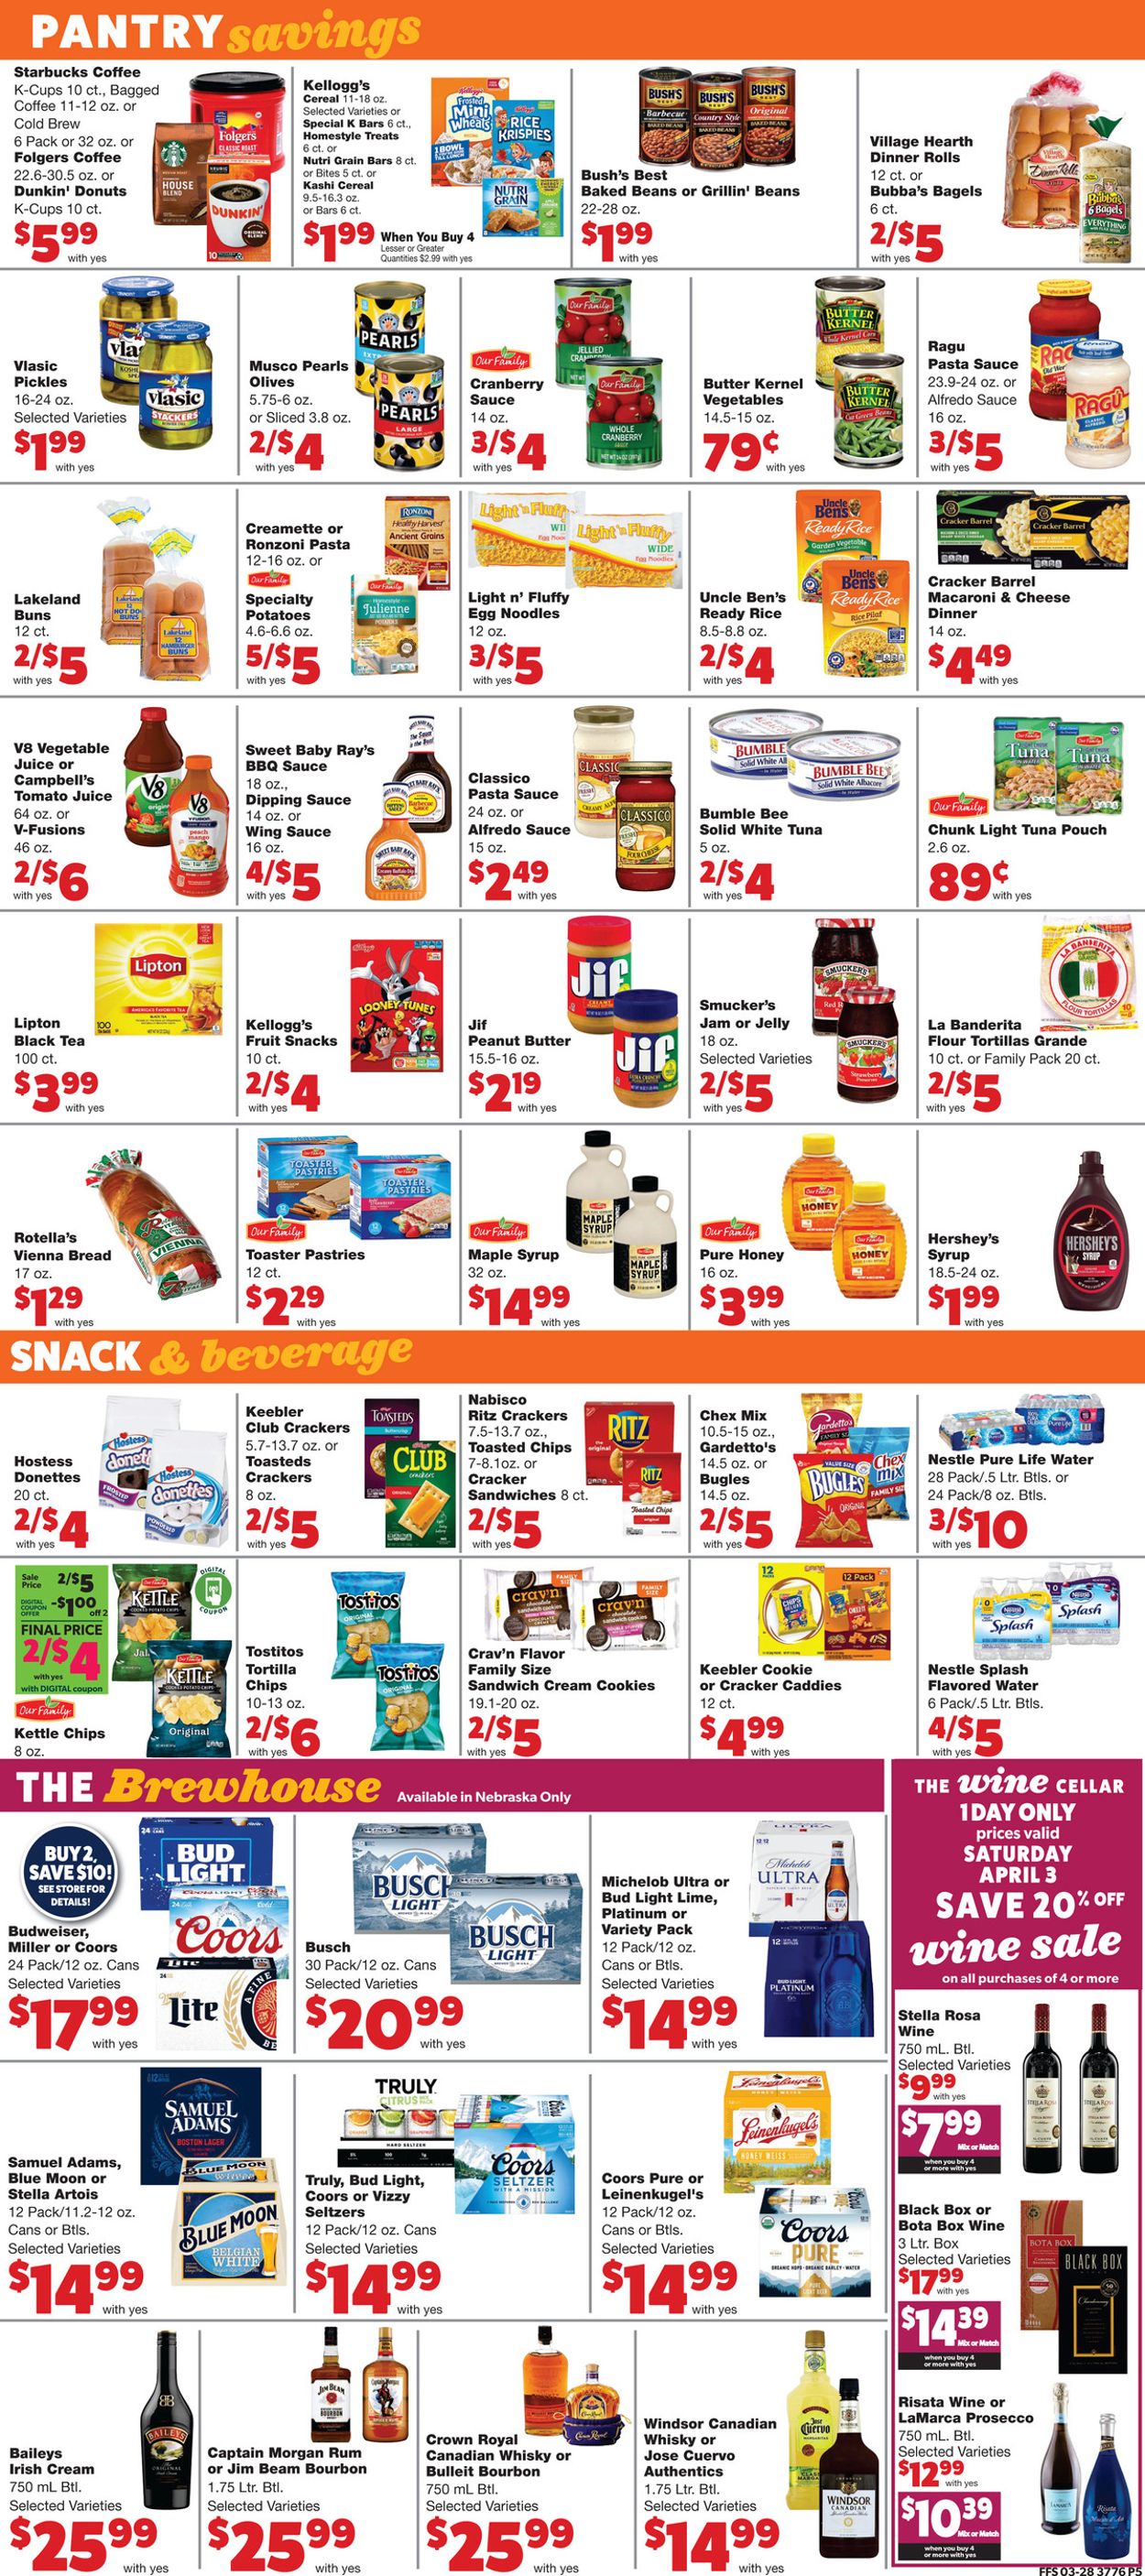 Family Fare - Easter 2021 ad Weekly Ad Circular - valid 03/31-04/06/2021 (Page 8)